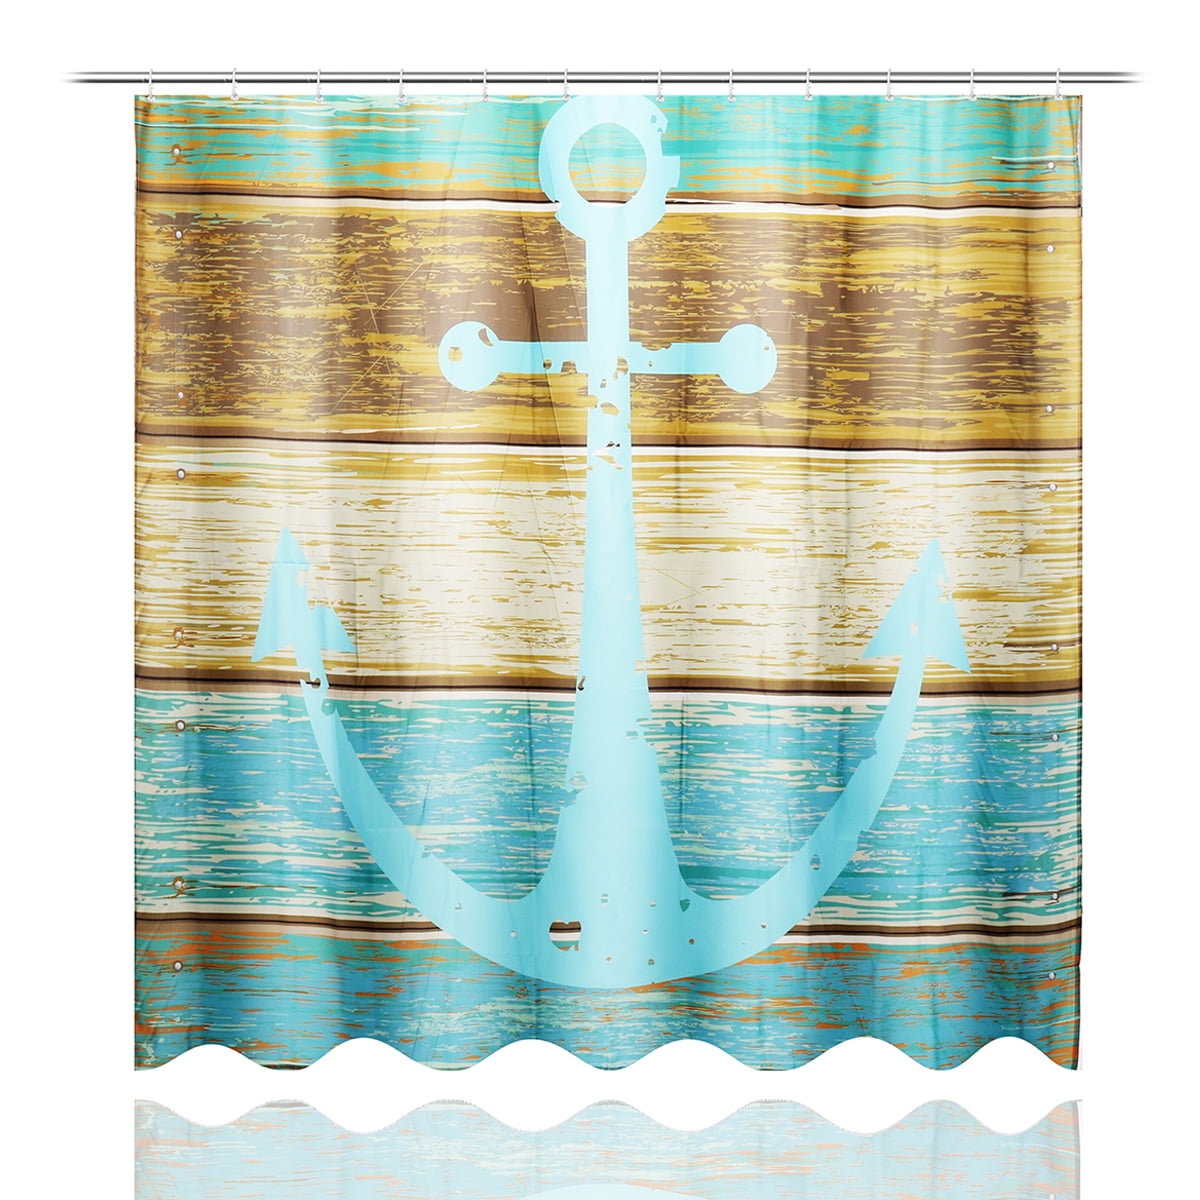 Ship Anchor Colorful Rustic Wood Plank Waterproof Fabric Shower Curtain Set 72" 